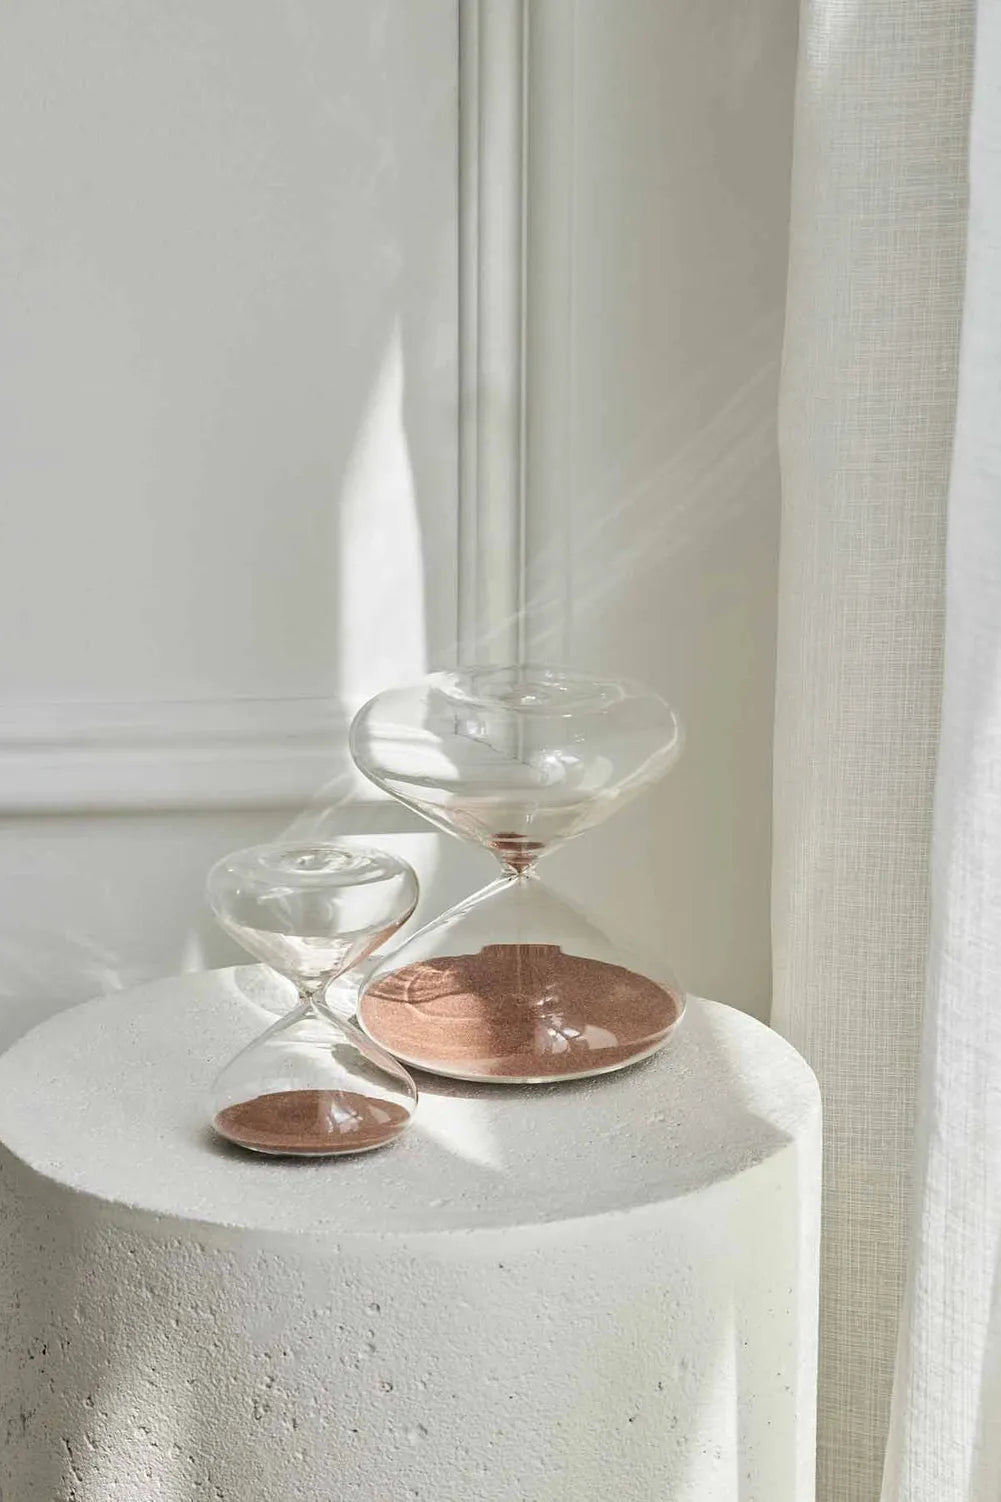 Mindful Focus Hourglass 30 Minutes, Glass Sand Timer